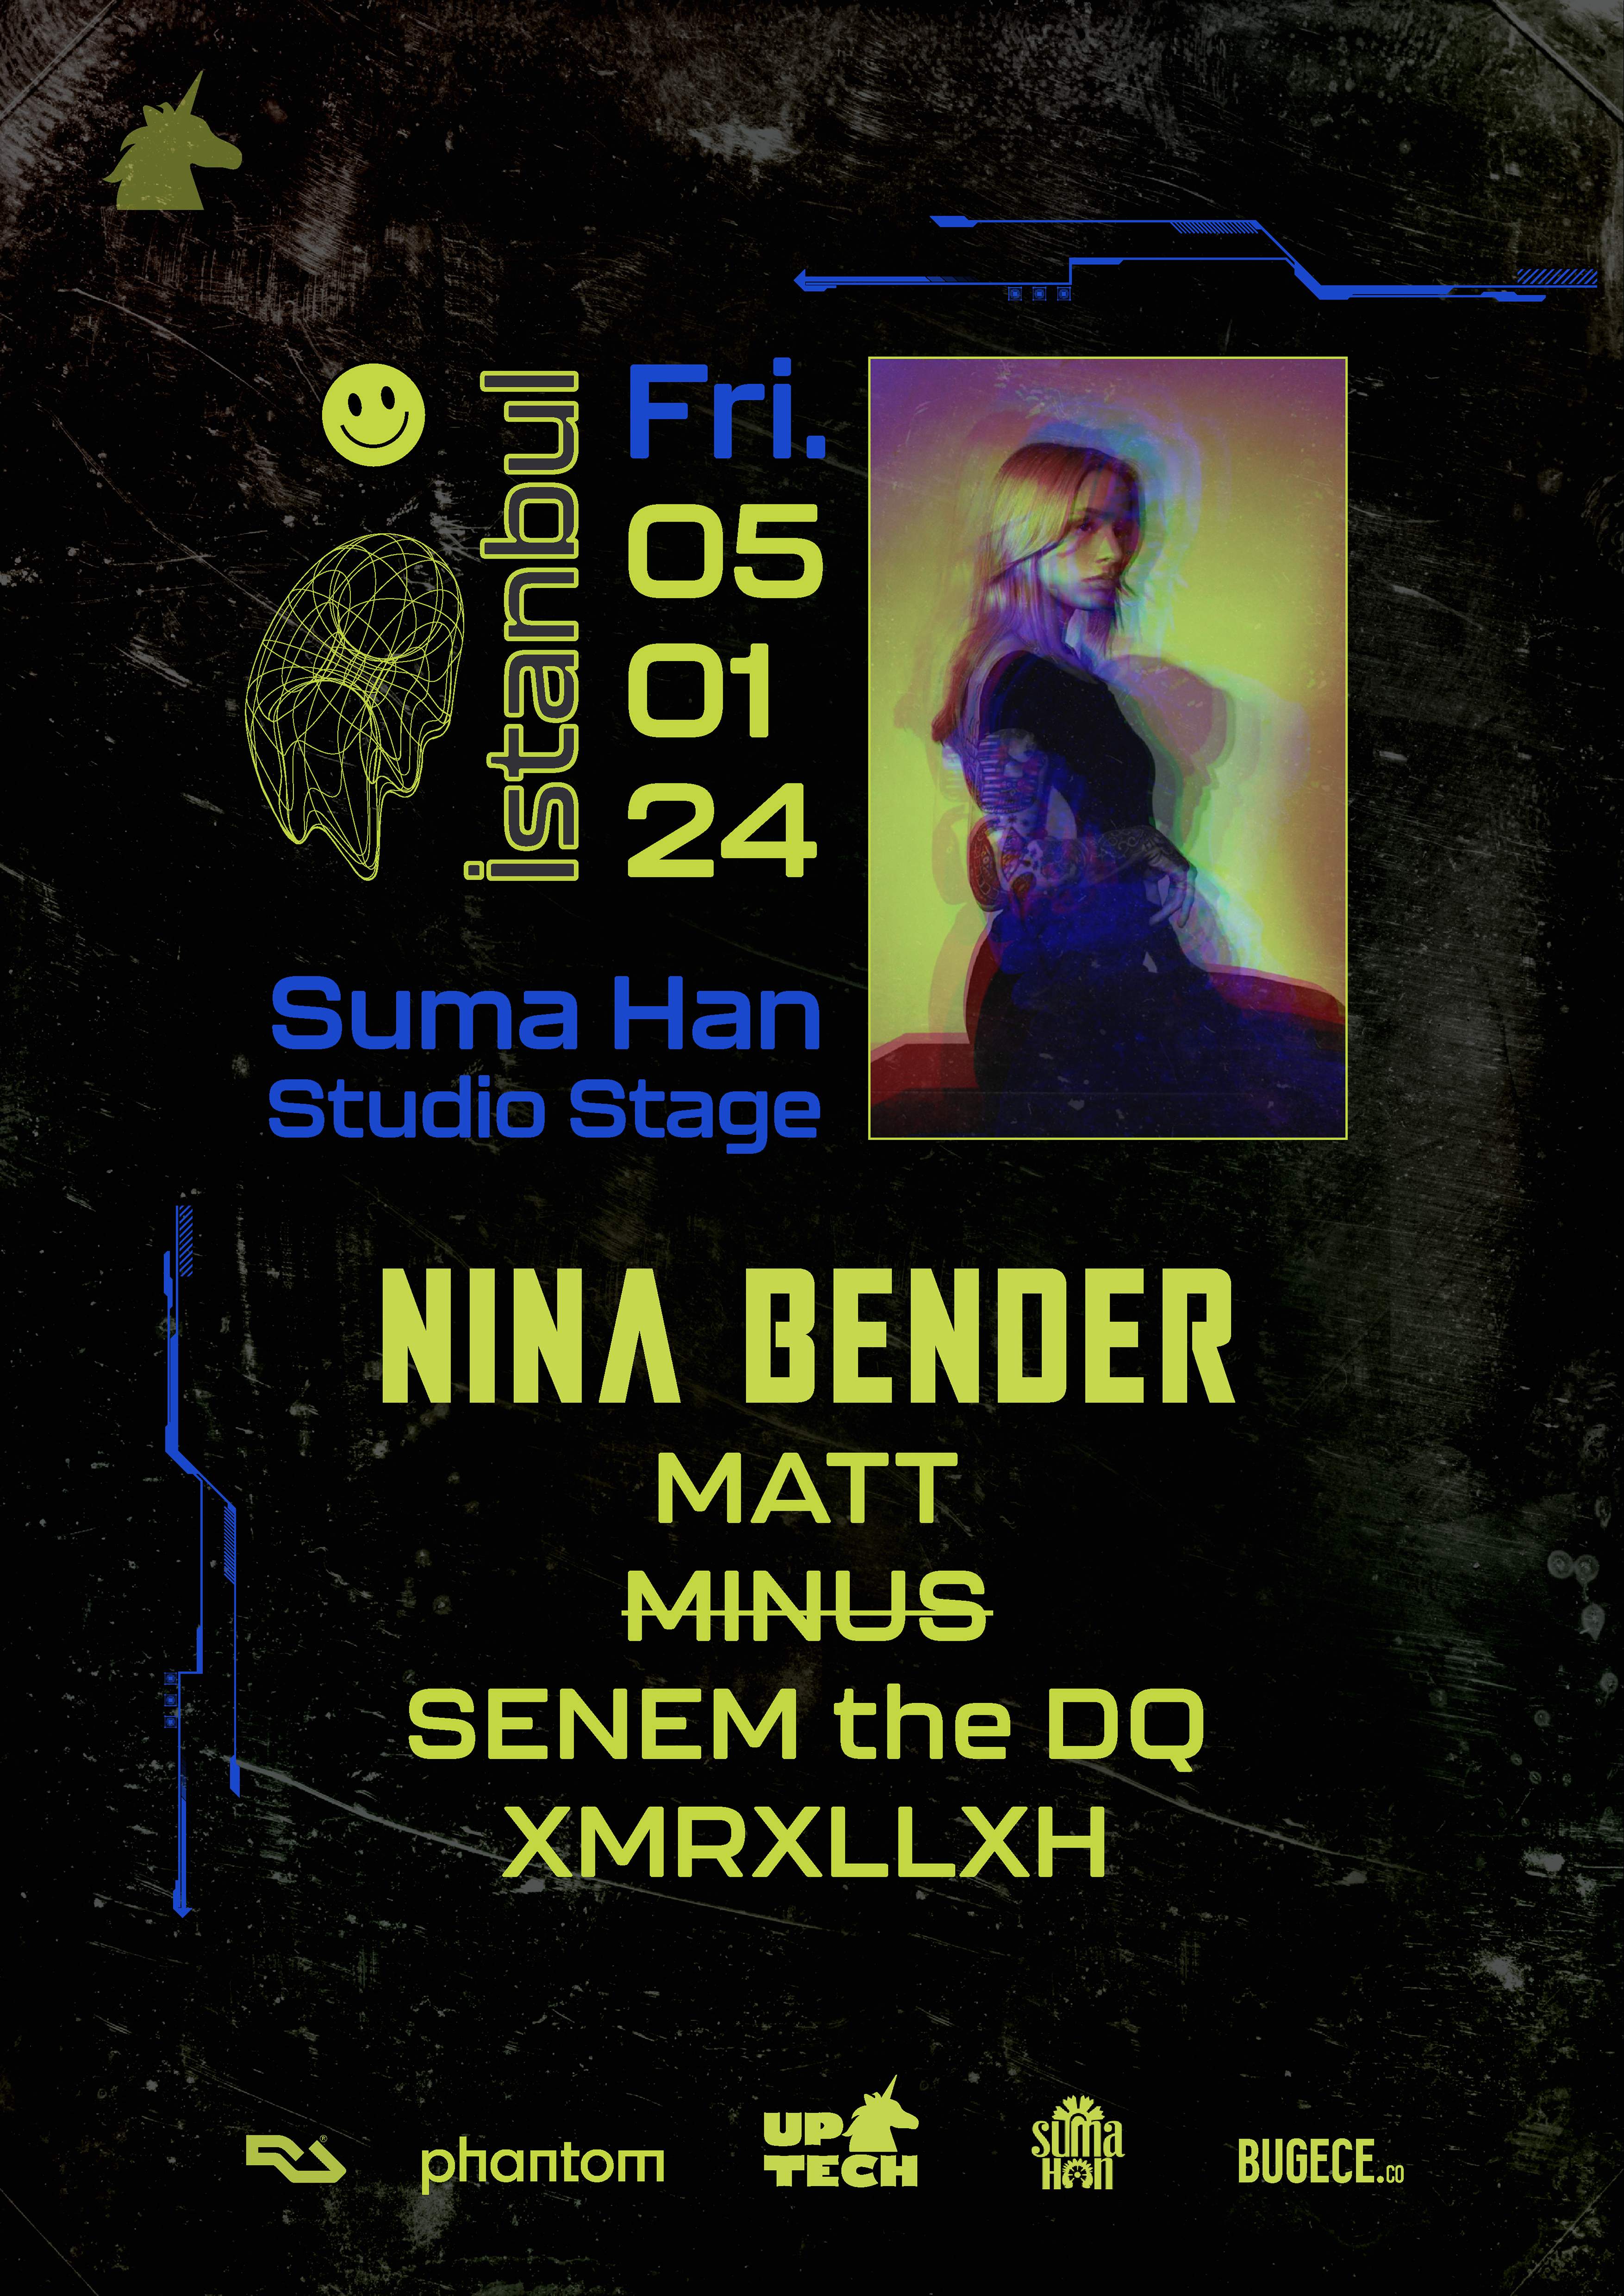 Nina Bender Istanbul by UPTech - フライヤー裏